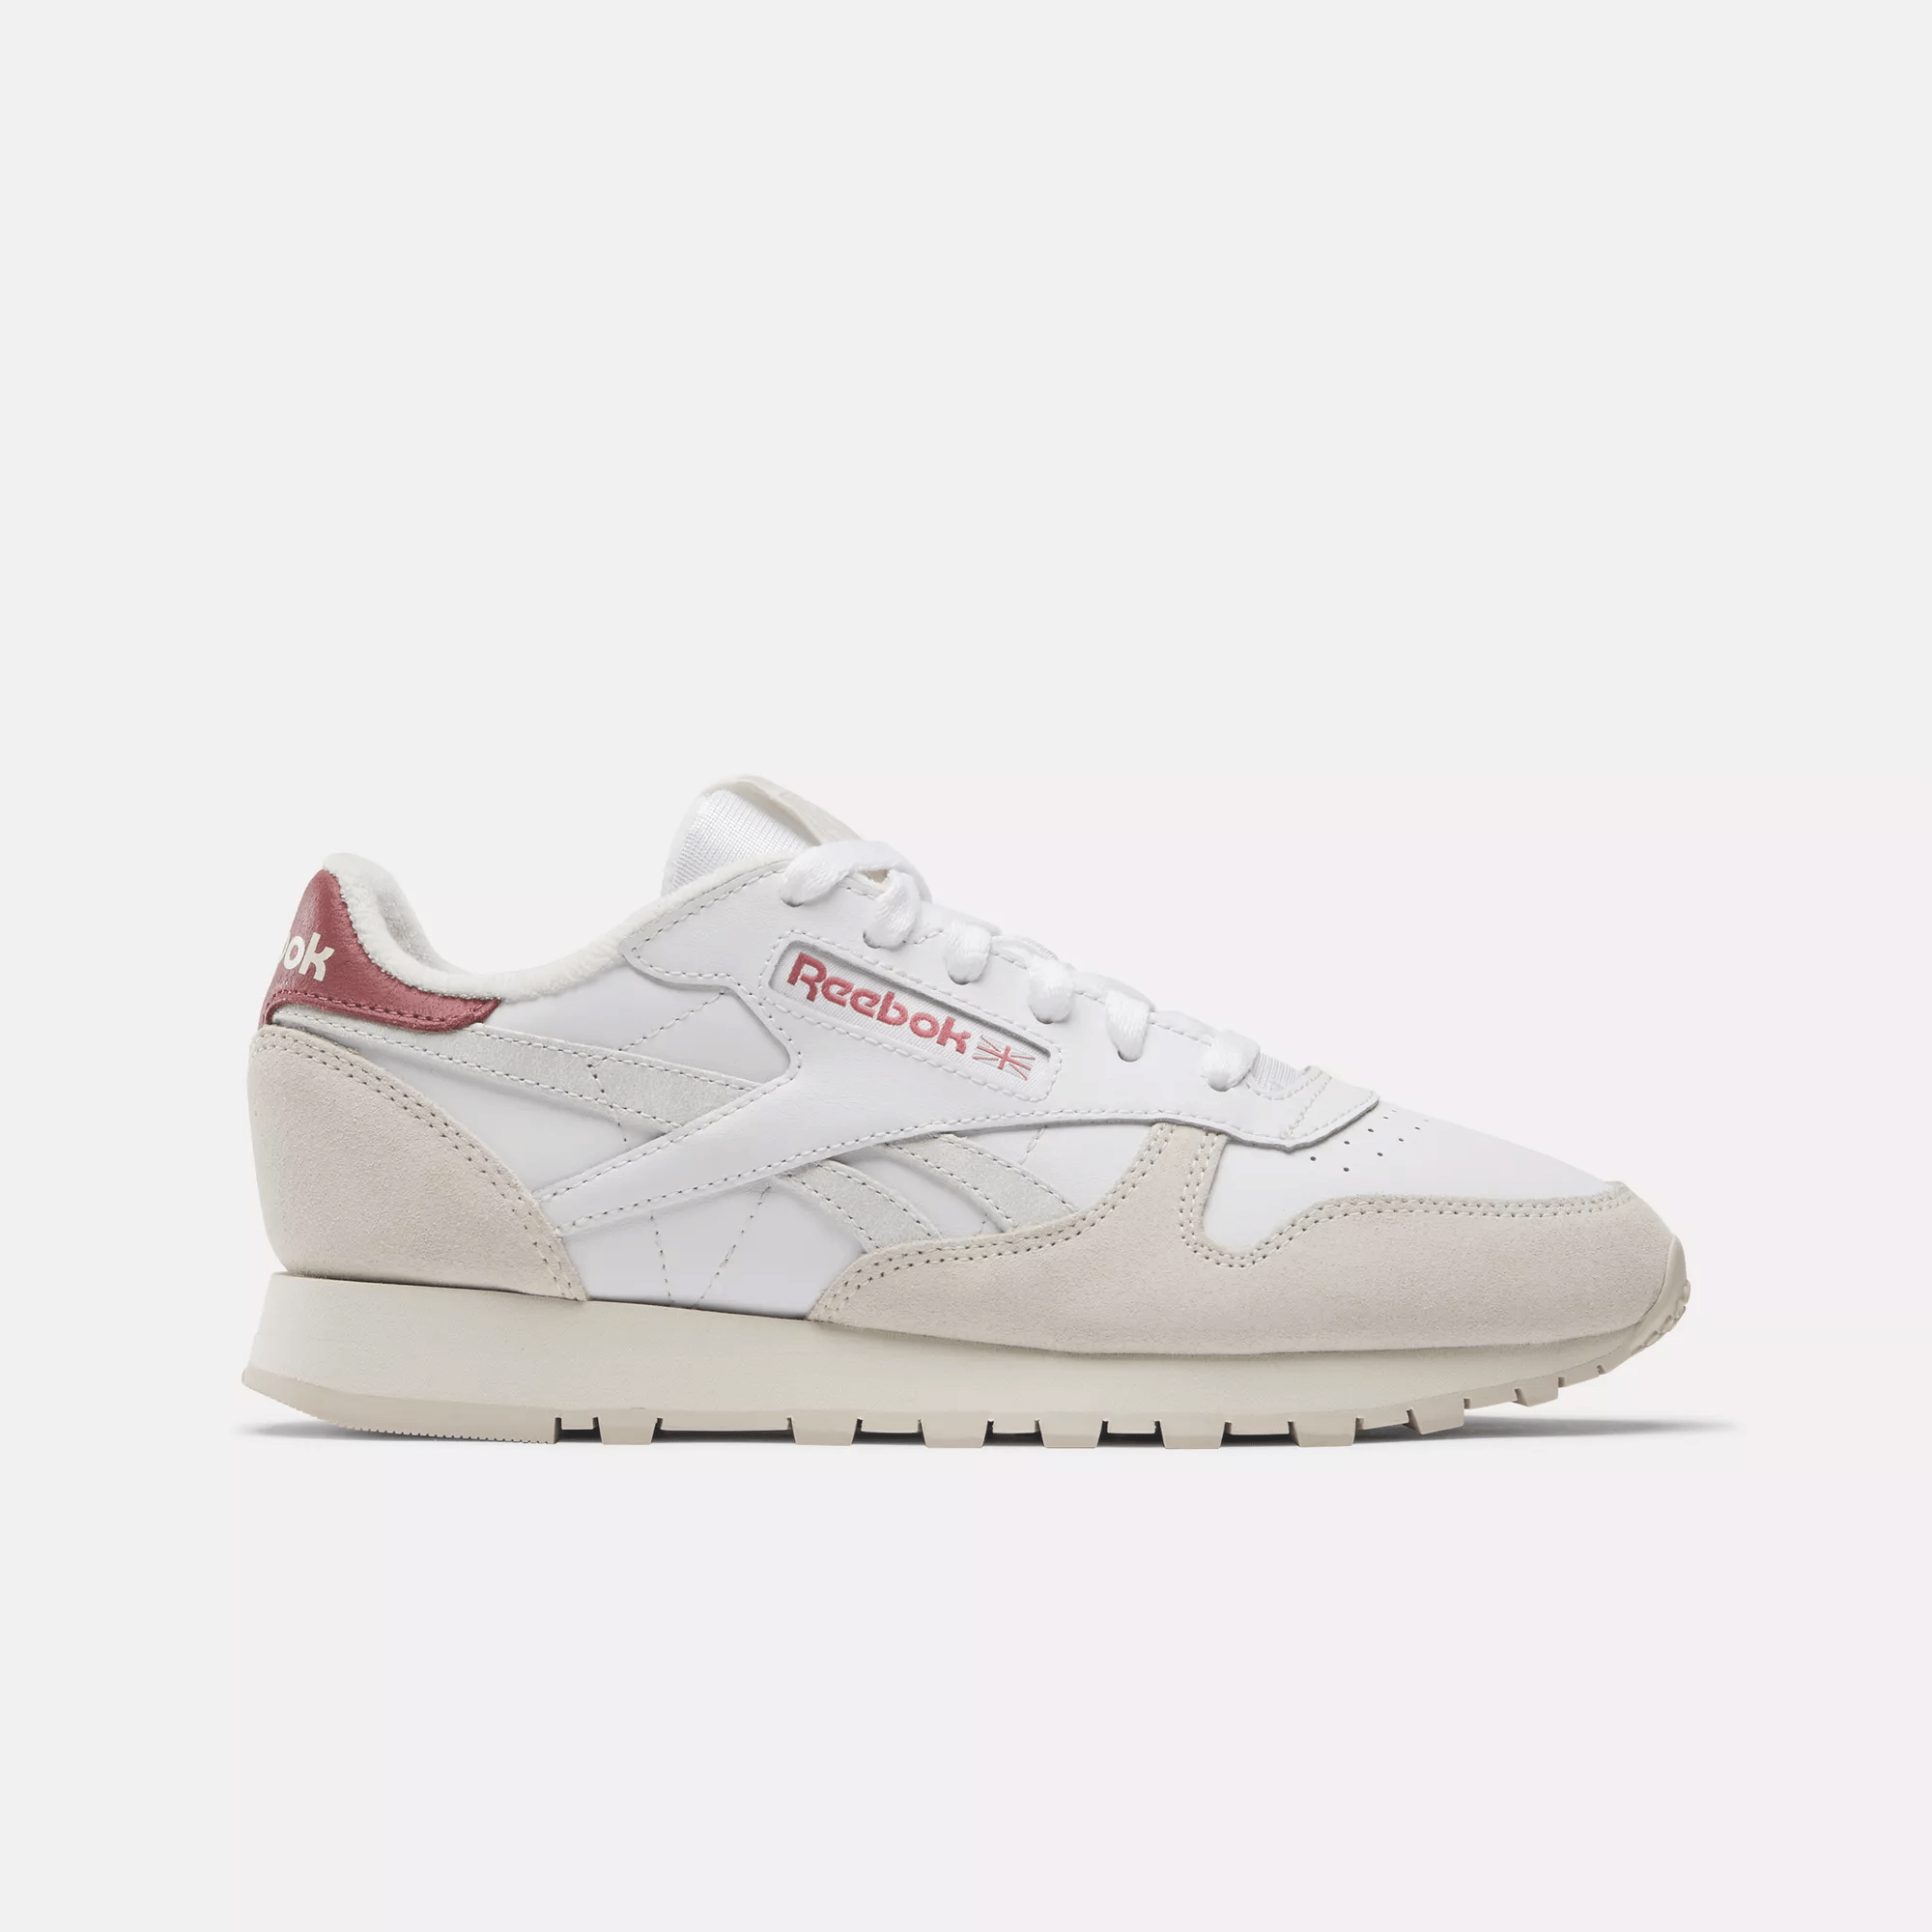 Reebok Classic Leather Women's Shoes In White